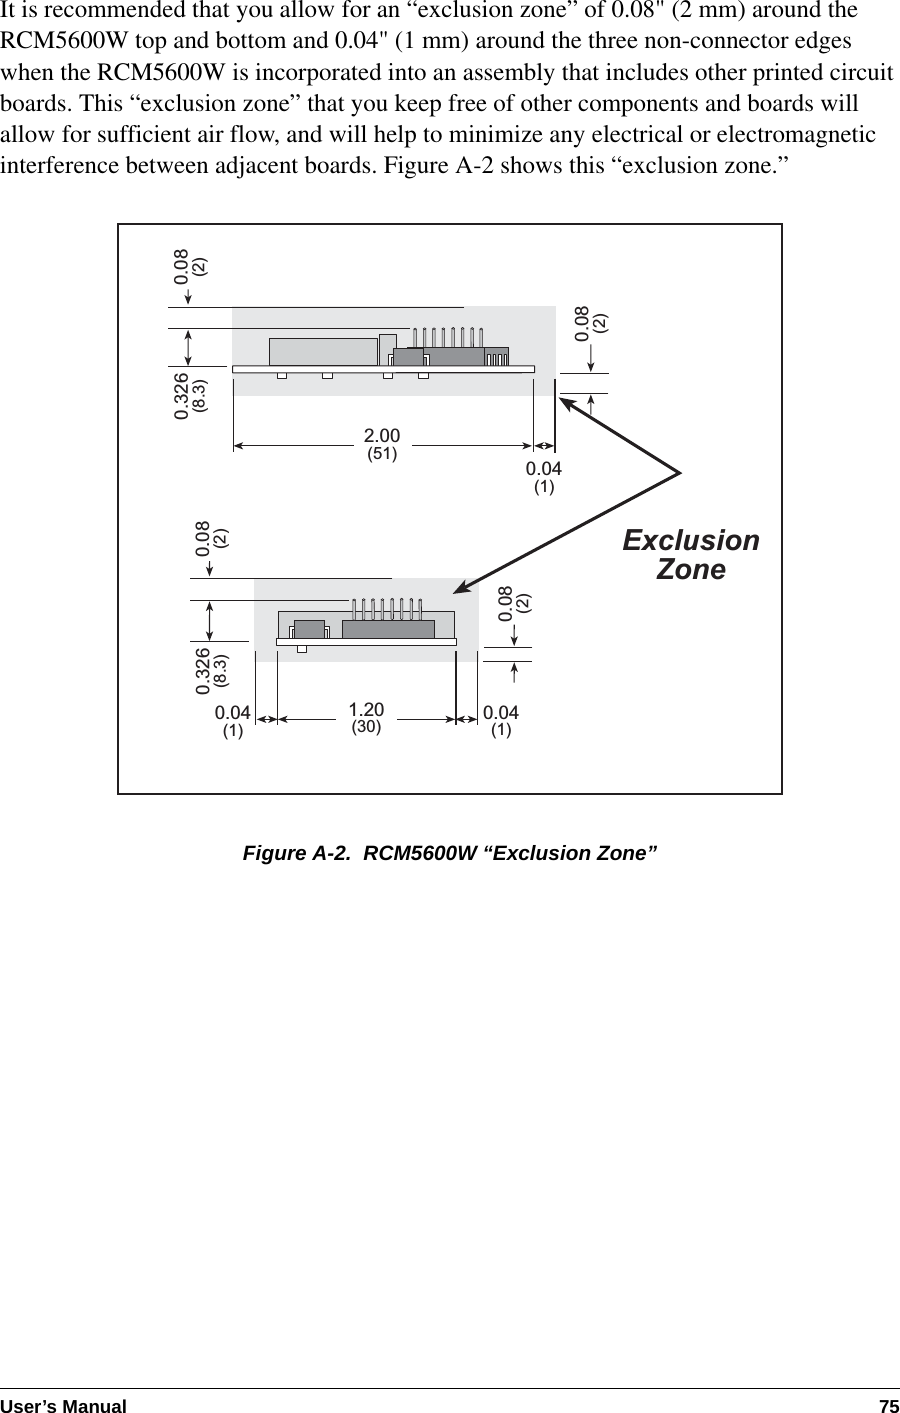 User’s Manual 75It is recommended that you allow for an “exclusion zone” of 0.08&quot; (2 mm) around the RCM5600W top and bottom and 0.04&quot; (1 mm) around the three non-connector edges when the RCM5600W is incorporated into an assembly that includes other printed circuit boards. This “exclusion zone” that you keep free of other components and boards will allow for sufficient air flow, and will help to minimize any electrical or electromagnetic interference between adjacent boards. Figure A-2 shows this “exclusion zone.”Figure A-2.  RCM5600W “Exclusion Zone”0.08(2)0.08(2)ExclusionZone0.04(1)0.04(1)0.08(2)0.326(8.3)0.04(1)0.08(2)0.326(8.3)2.00(51)1.20(30)